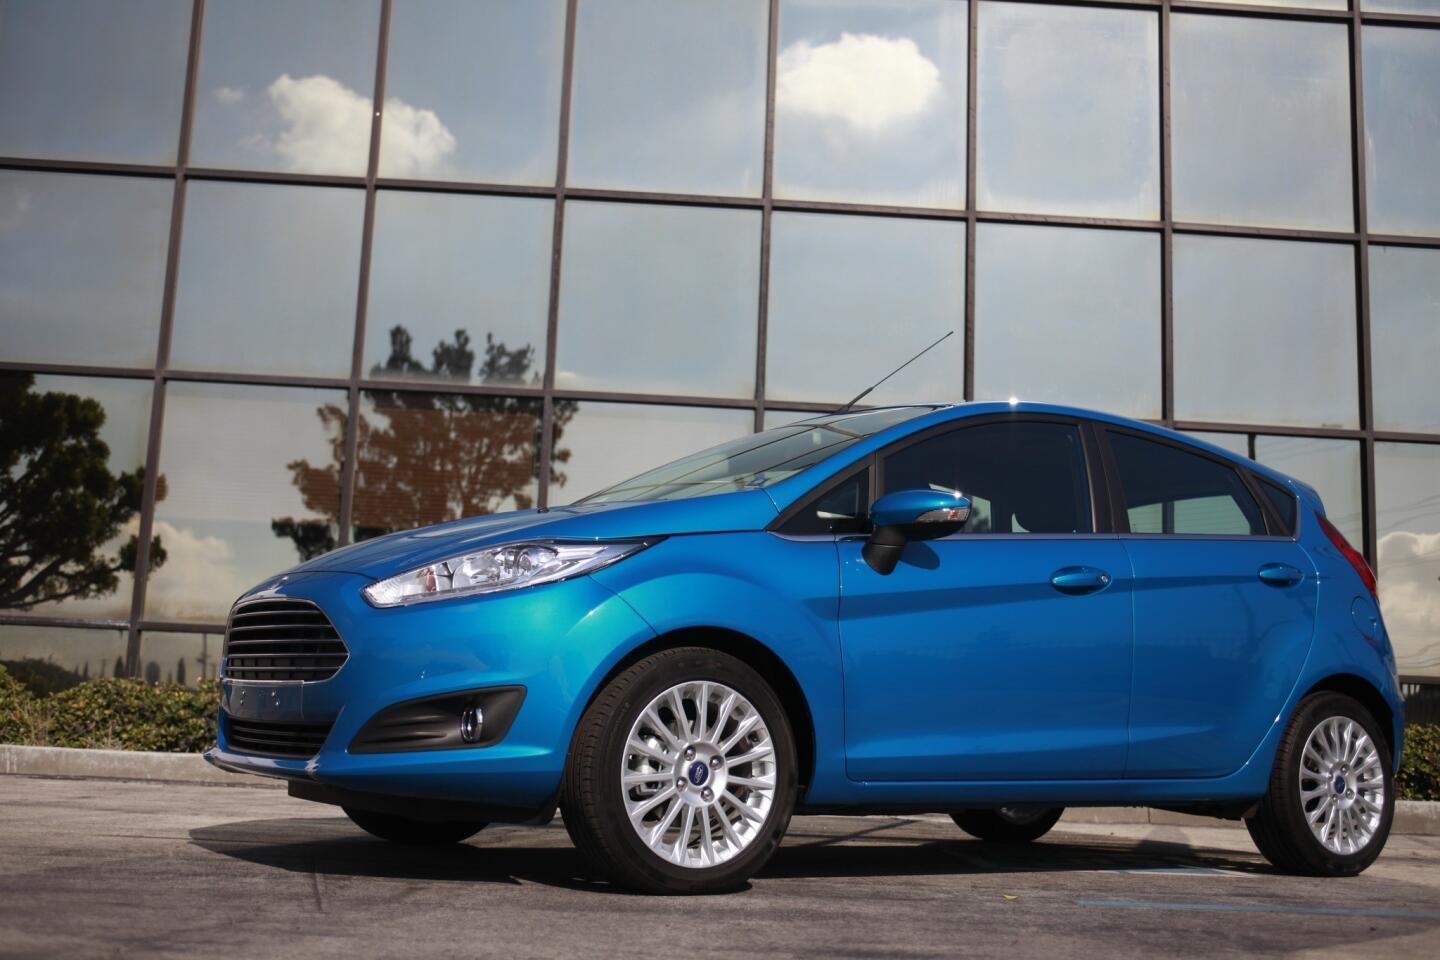 2t. The Ford Fiesta SFE package comes with a 3 cylinder 1.0-liter EcoBoost engine. It gets a combined 37 mpg.